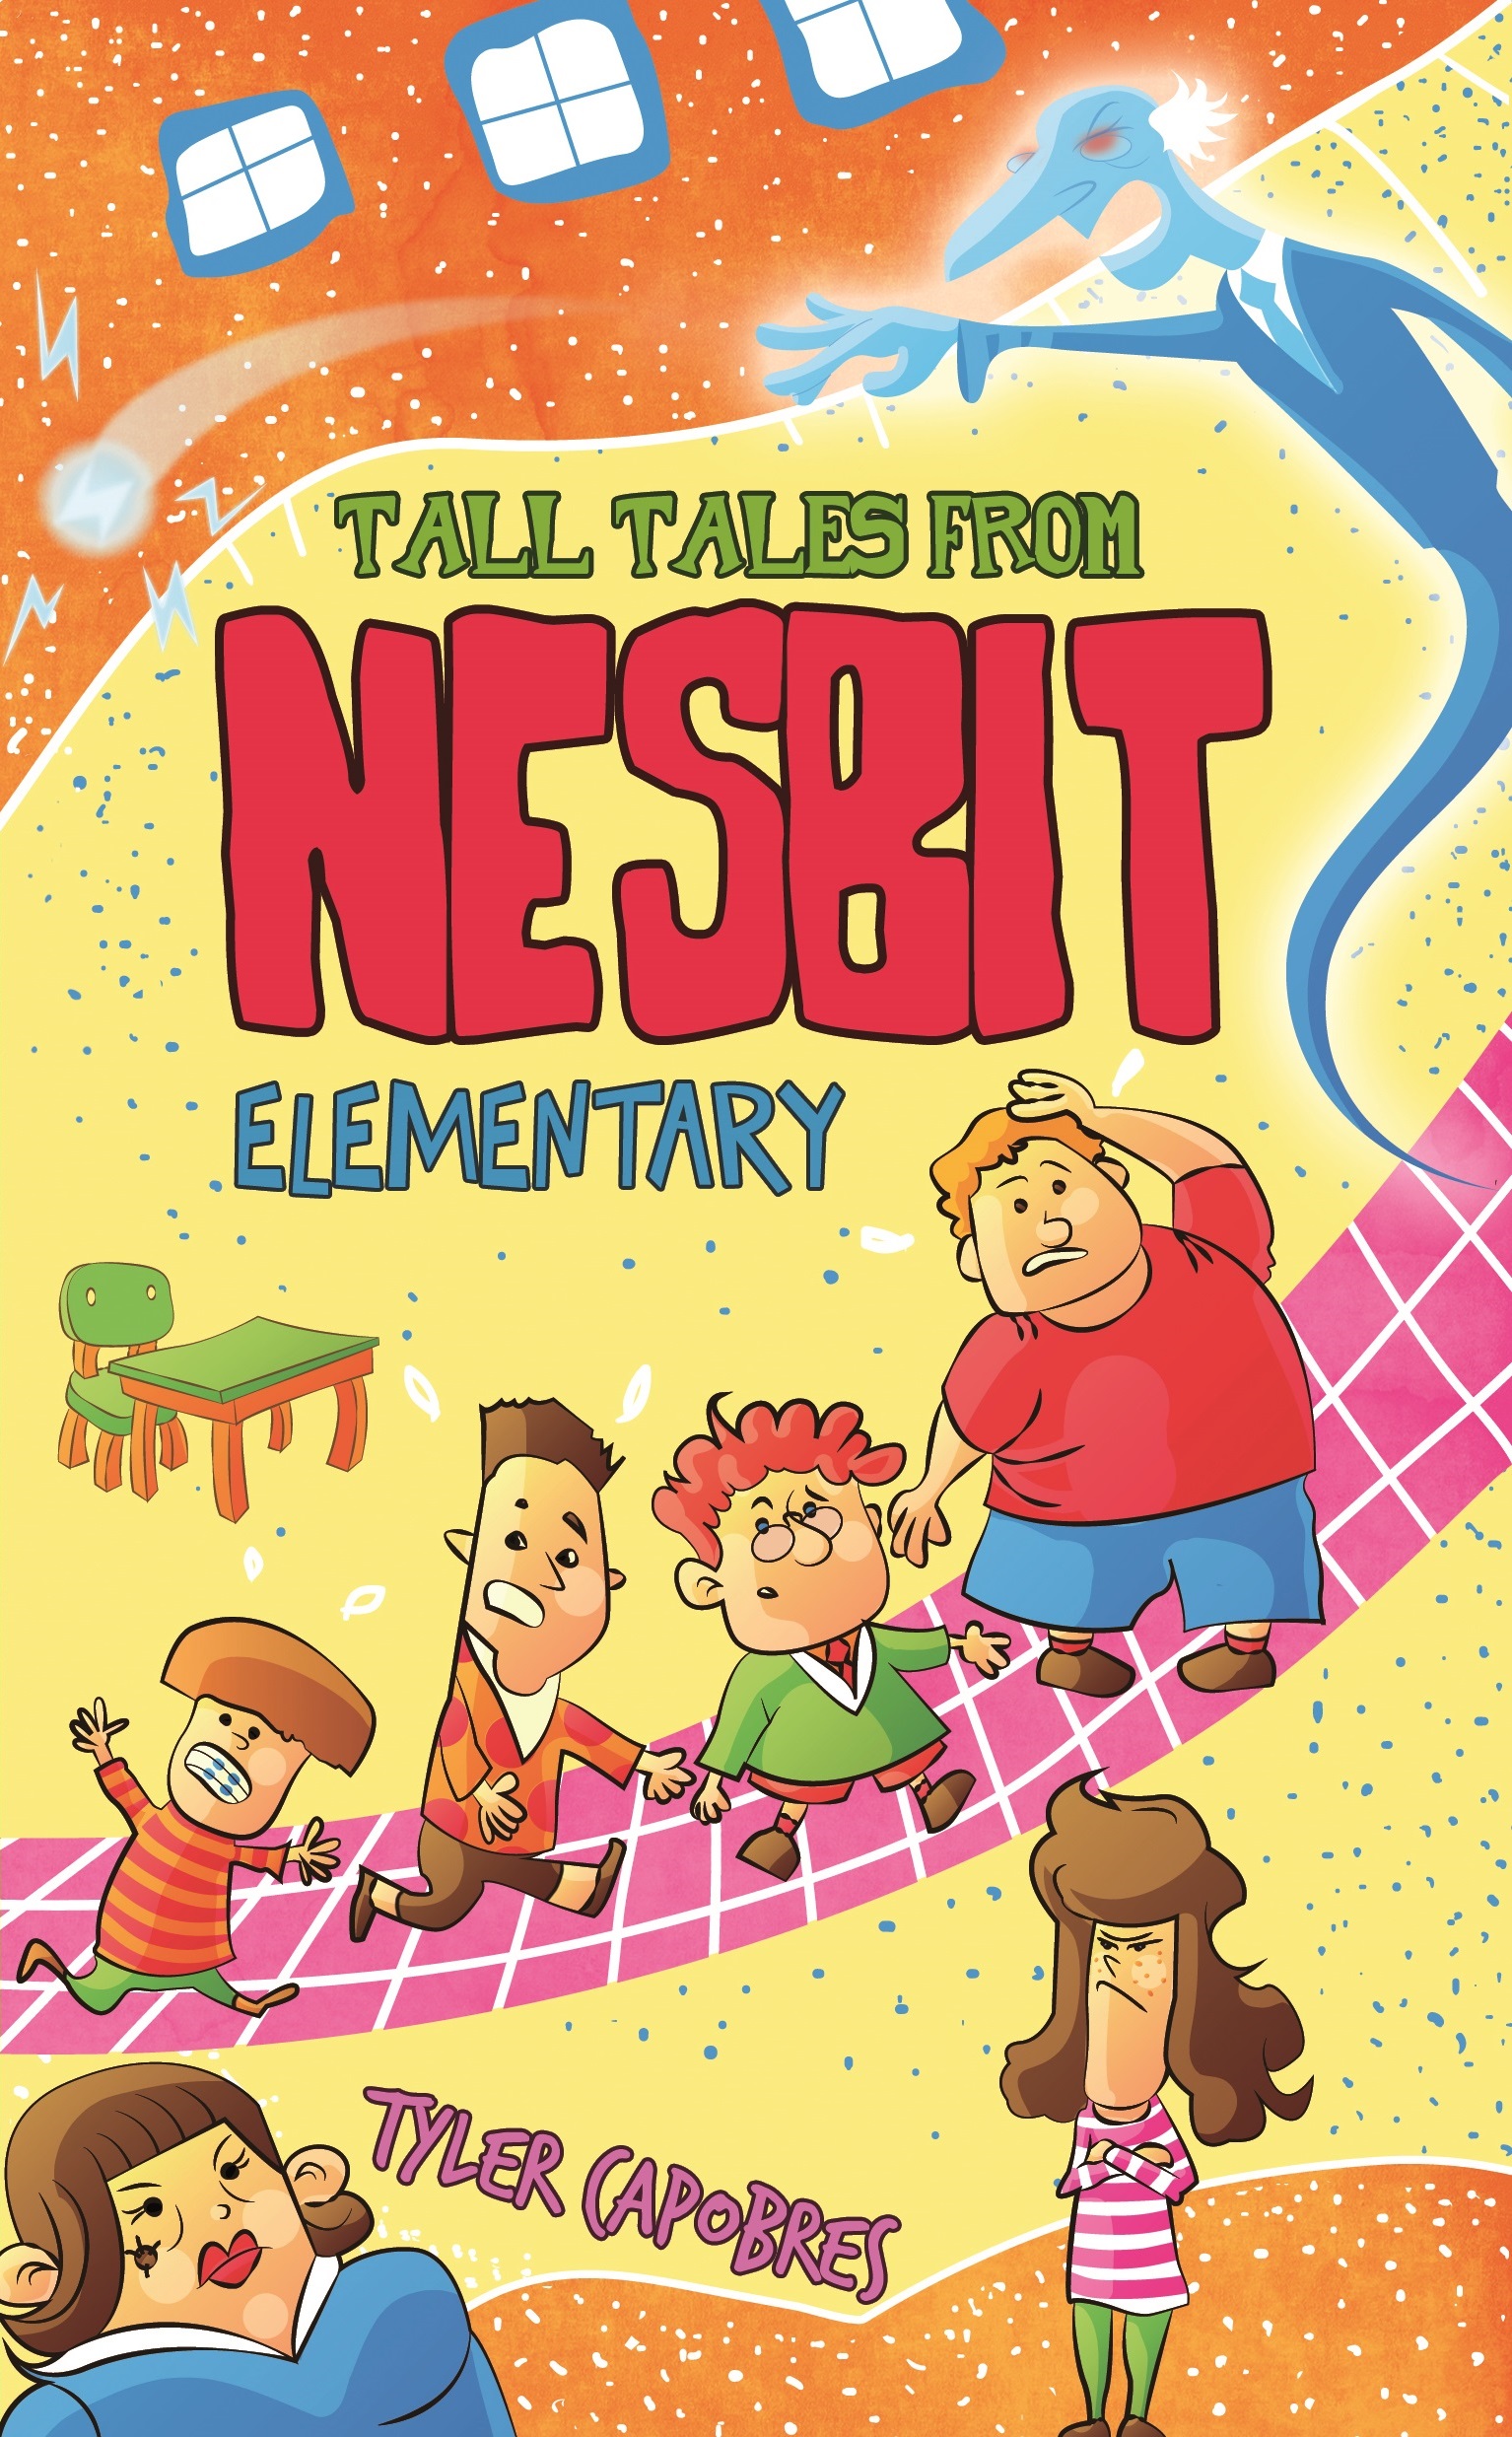 Tall Tales from Nesbit Elementary by Tyler Capobres